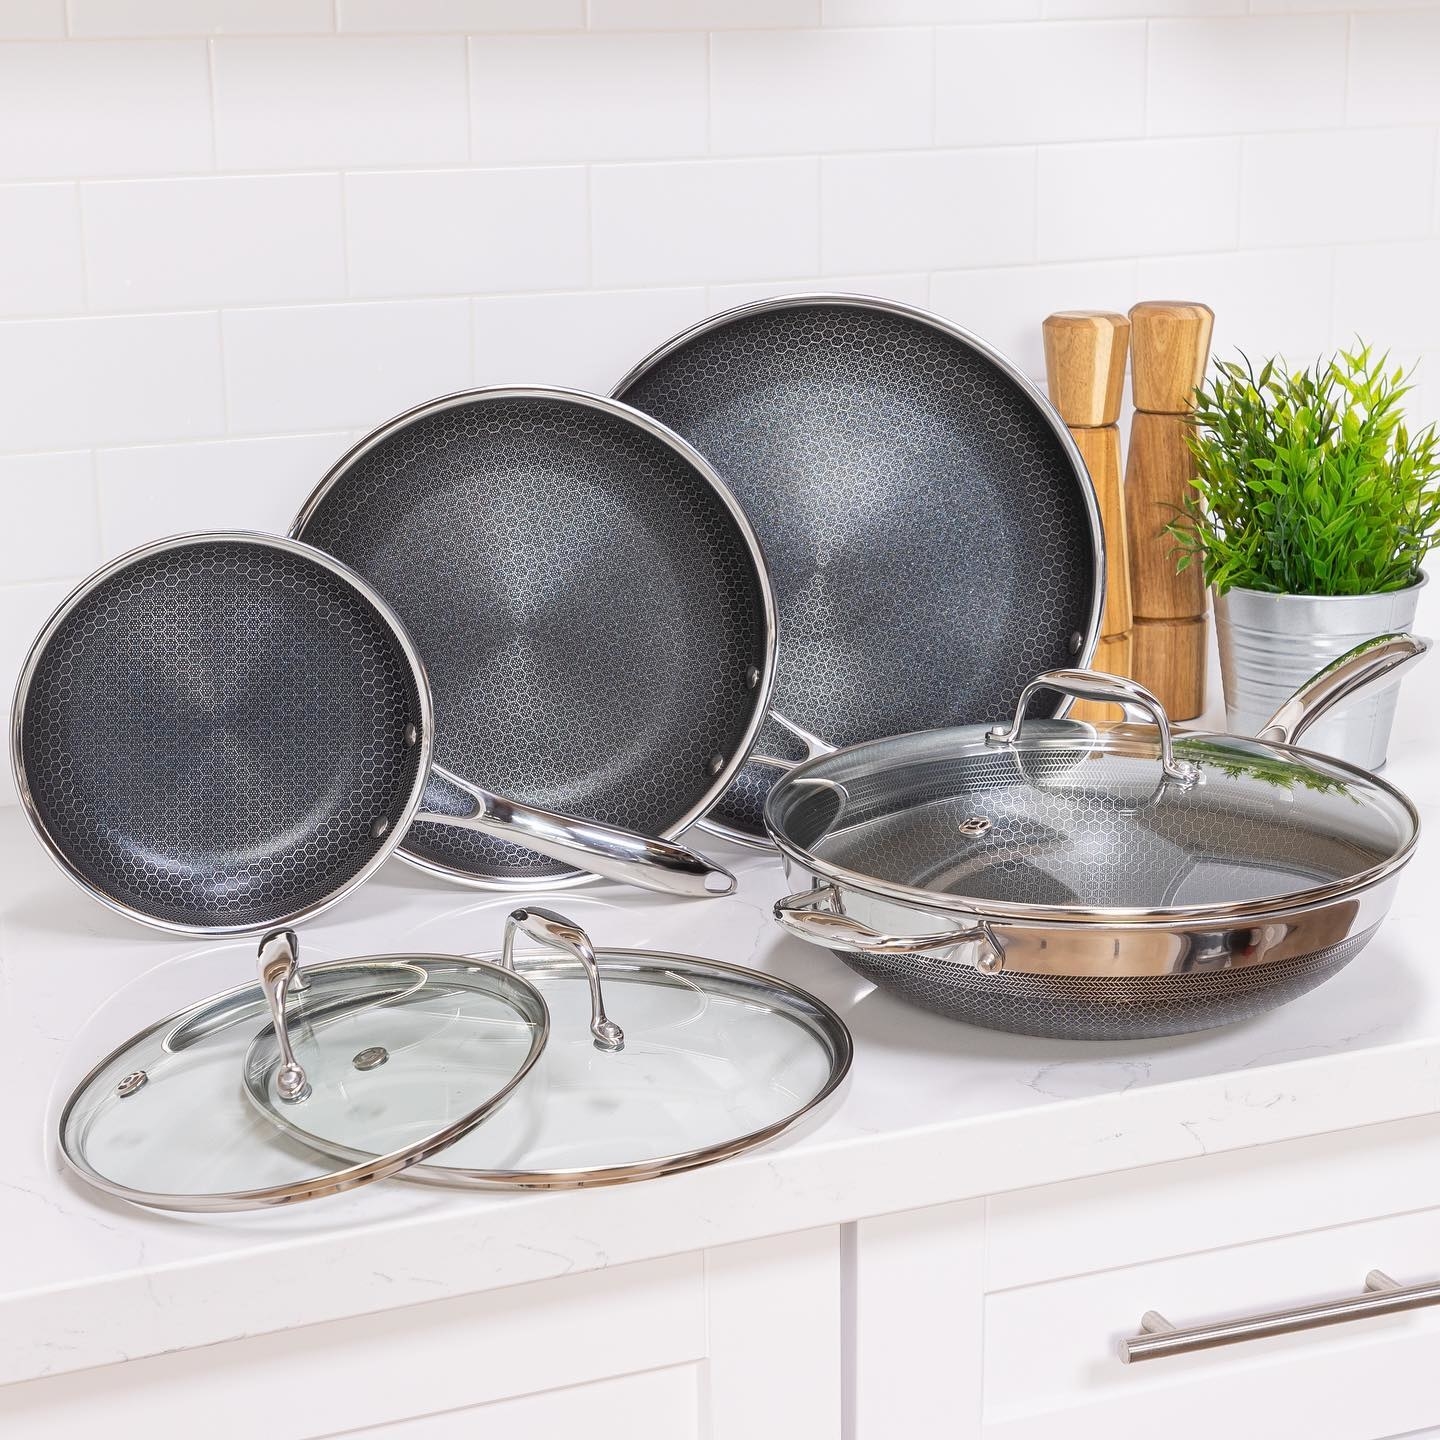 the 7-piece cookware set sitting on a kitchen counter